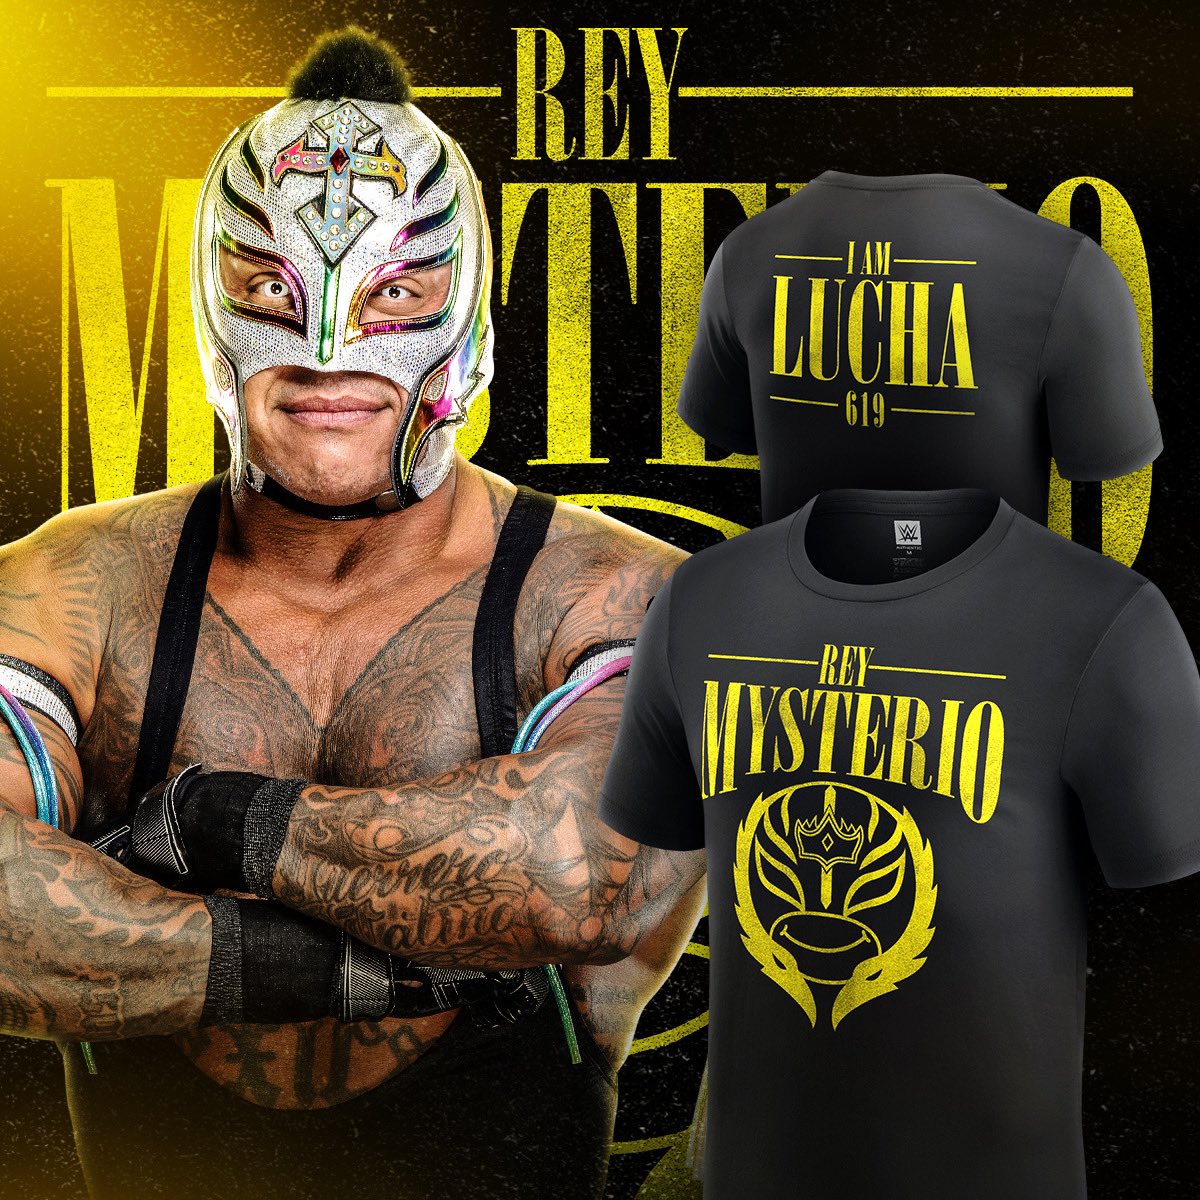 He is Lucha! Rey Mysterio has a NEW t-shirt available NOW at #WWEShop #WWE 🛒: bit.ly/4aEJy0o